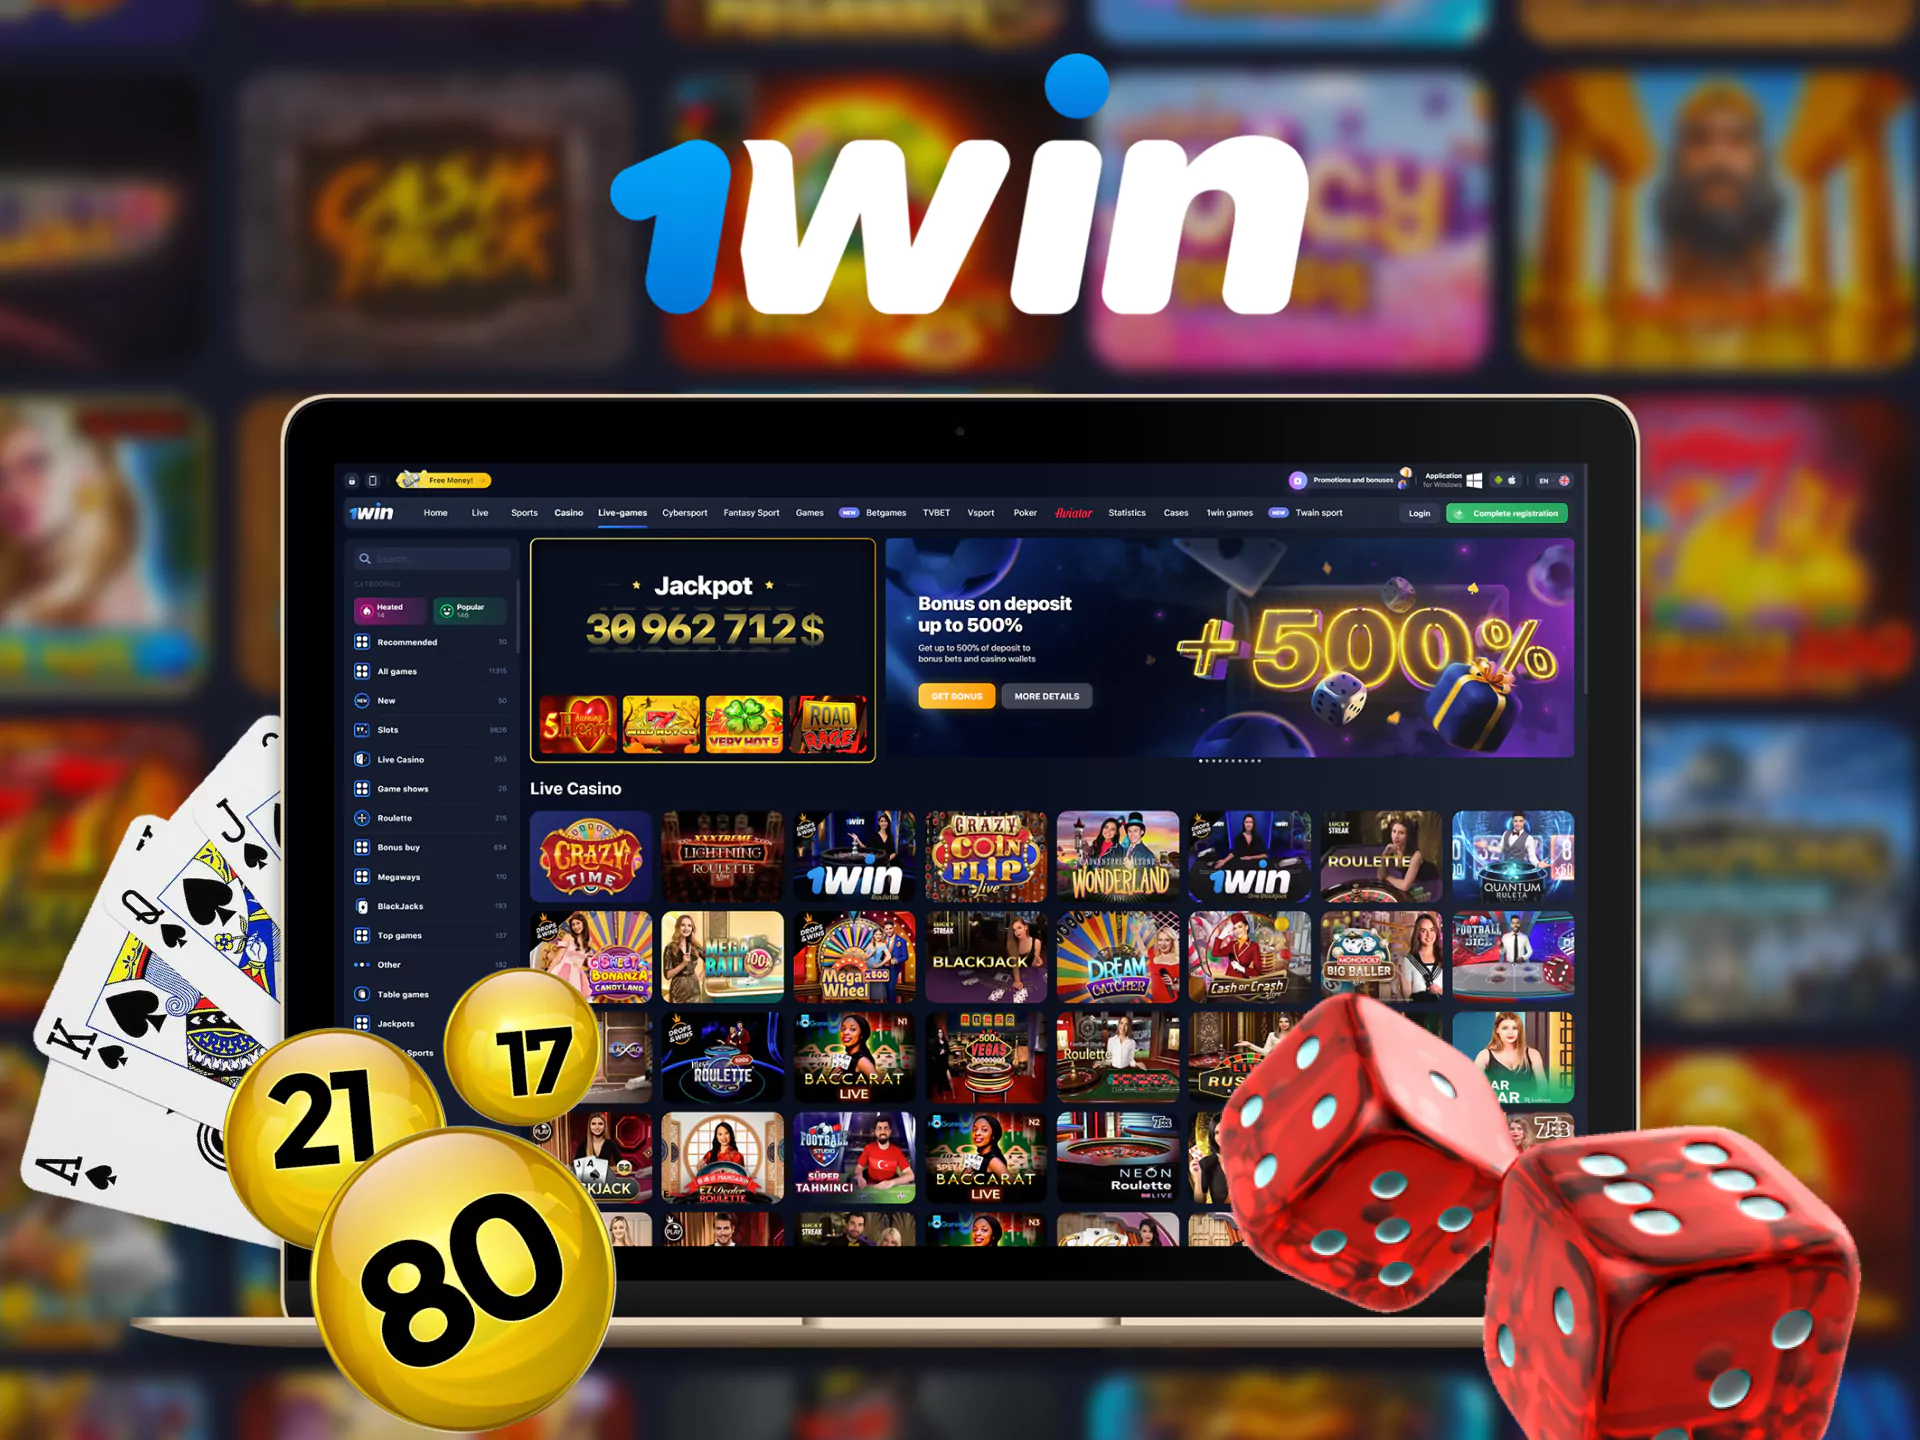 Find out the difference between a regular casino and a live casino on 1Win.